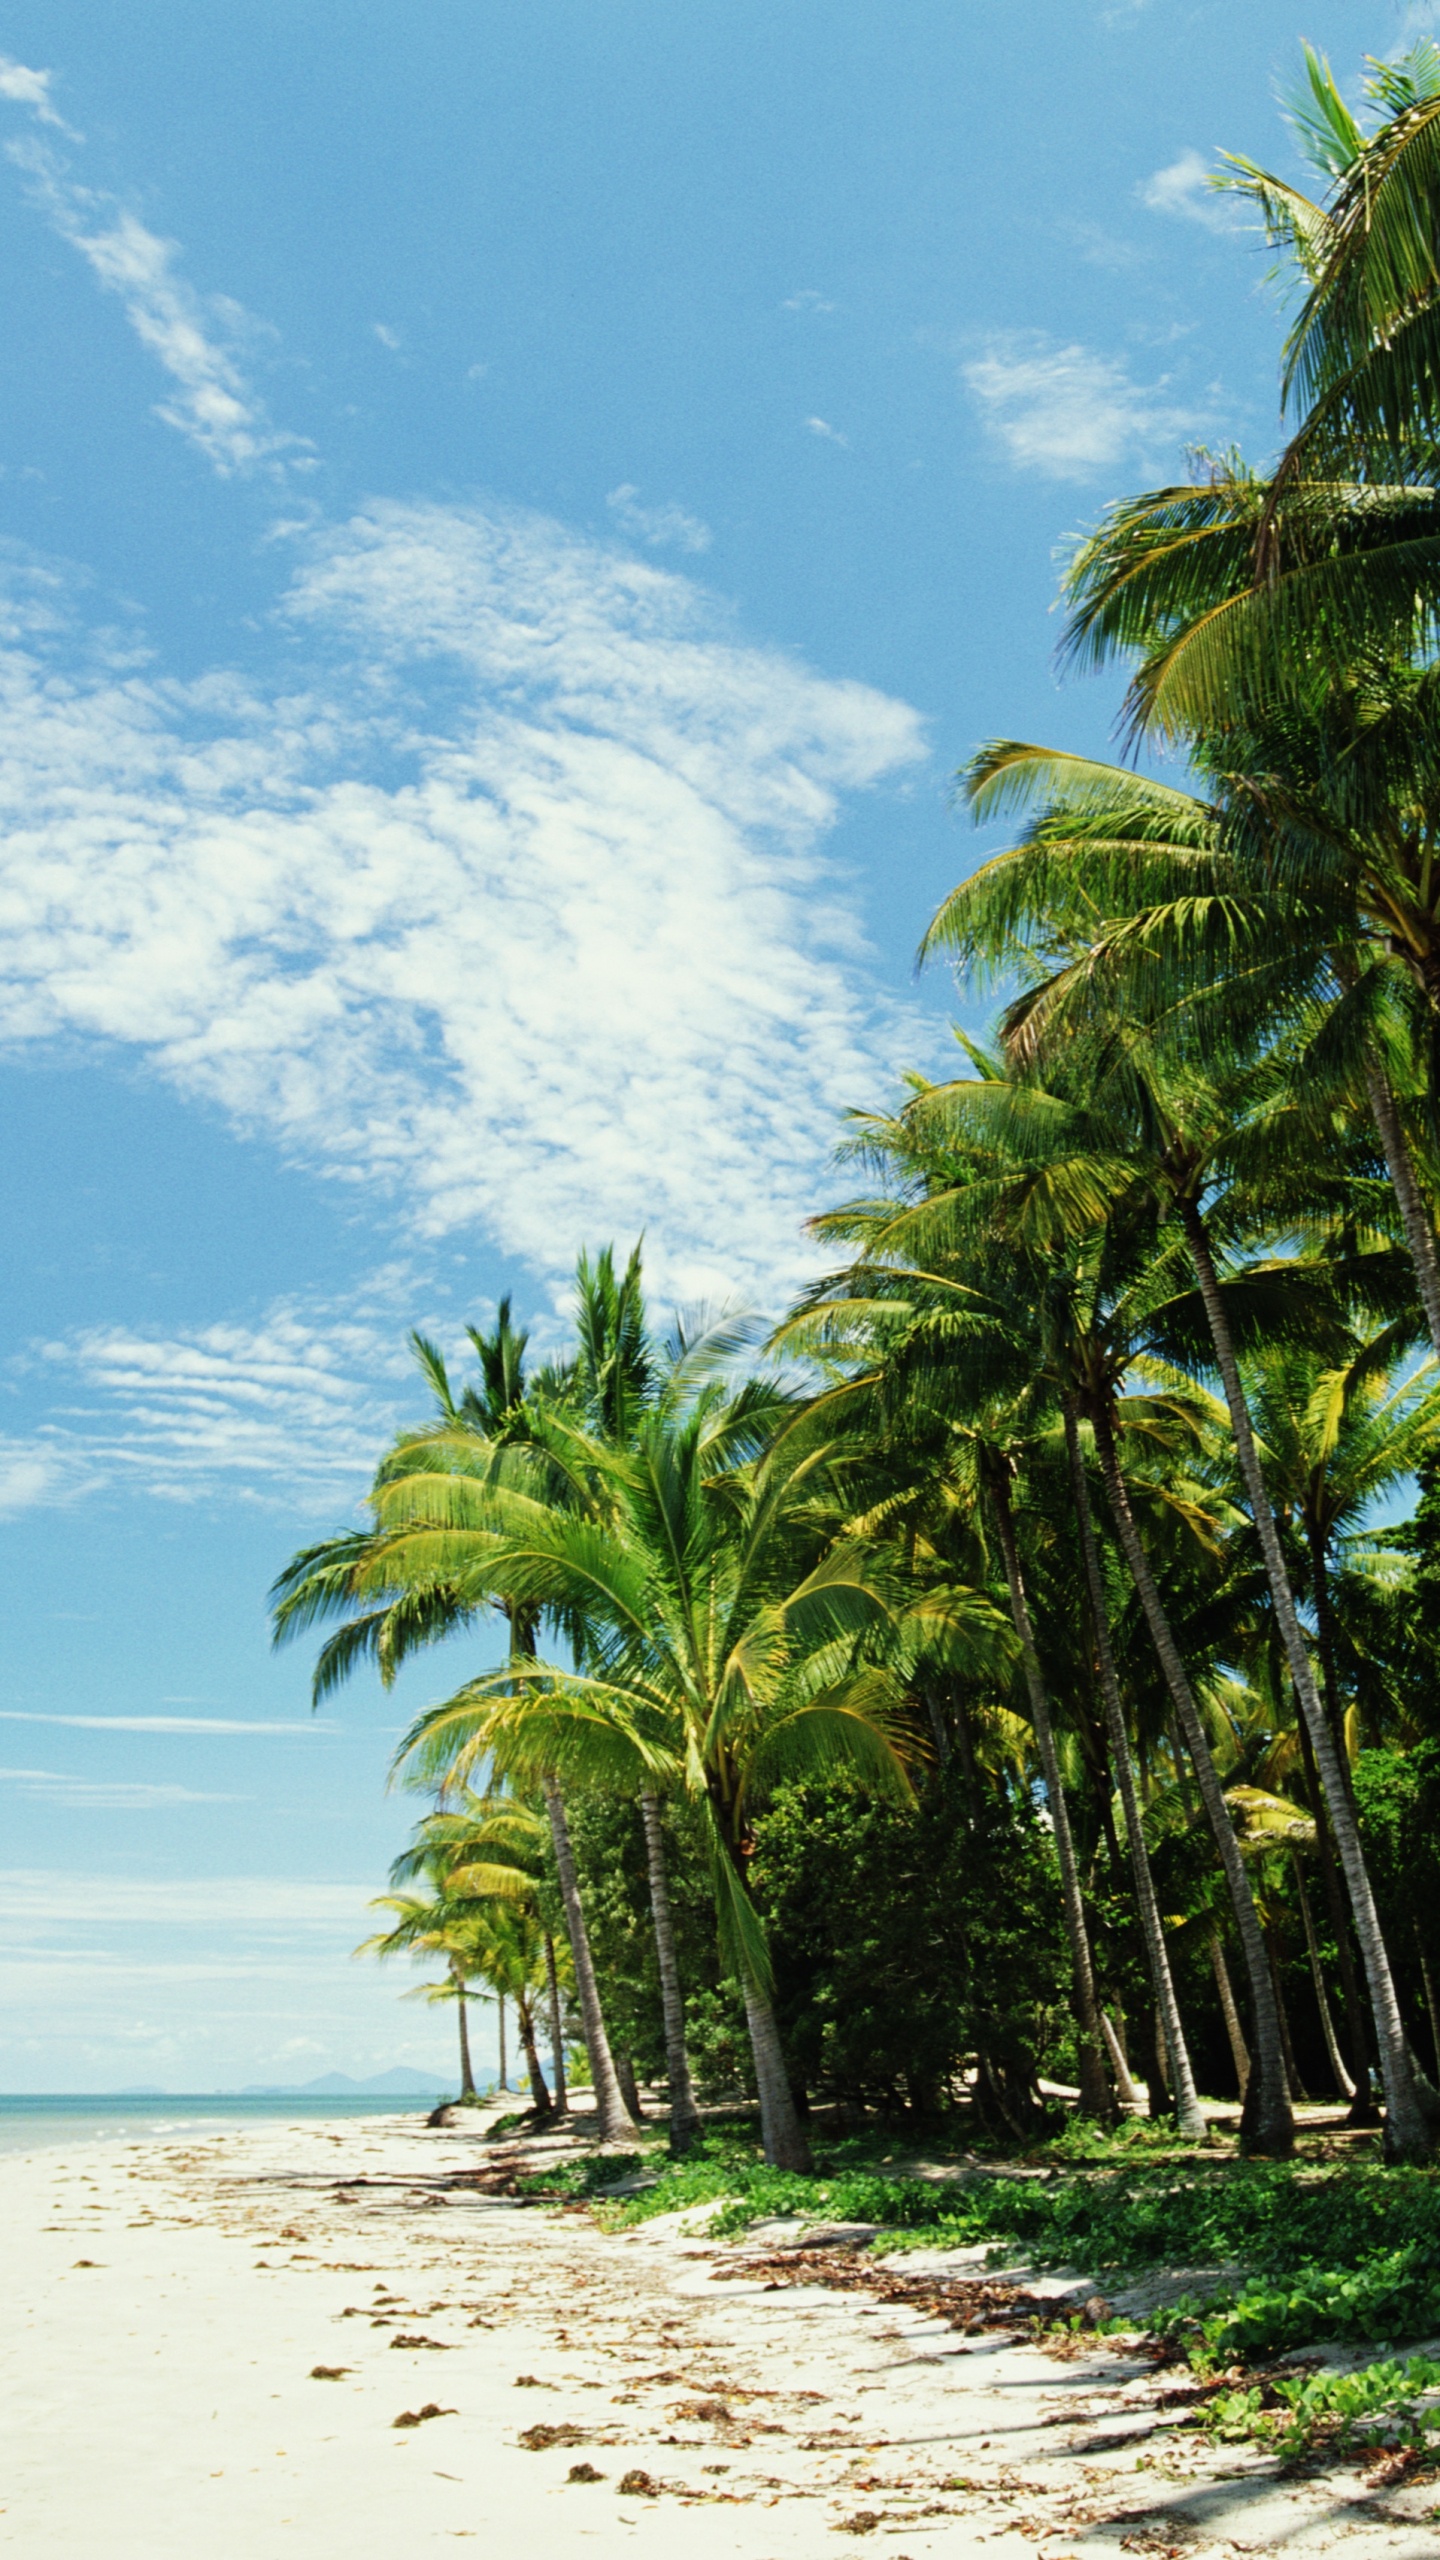 Green Palm Trees on White Sand Beach During Daytime. Wallpaper in 1440x2560 Resolution